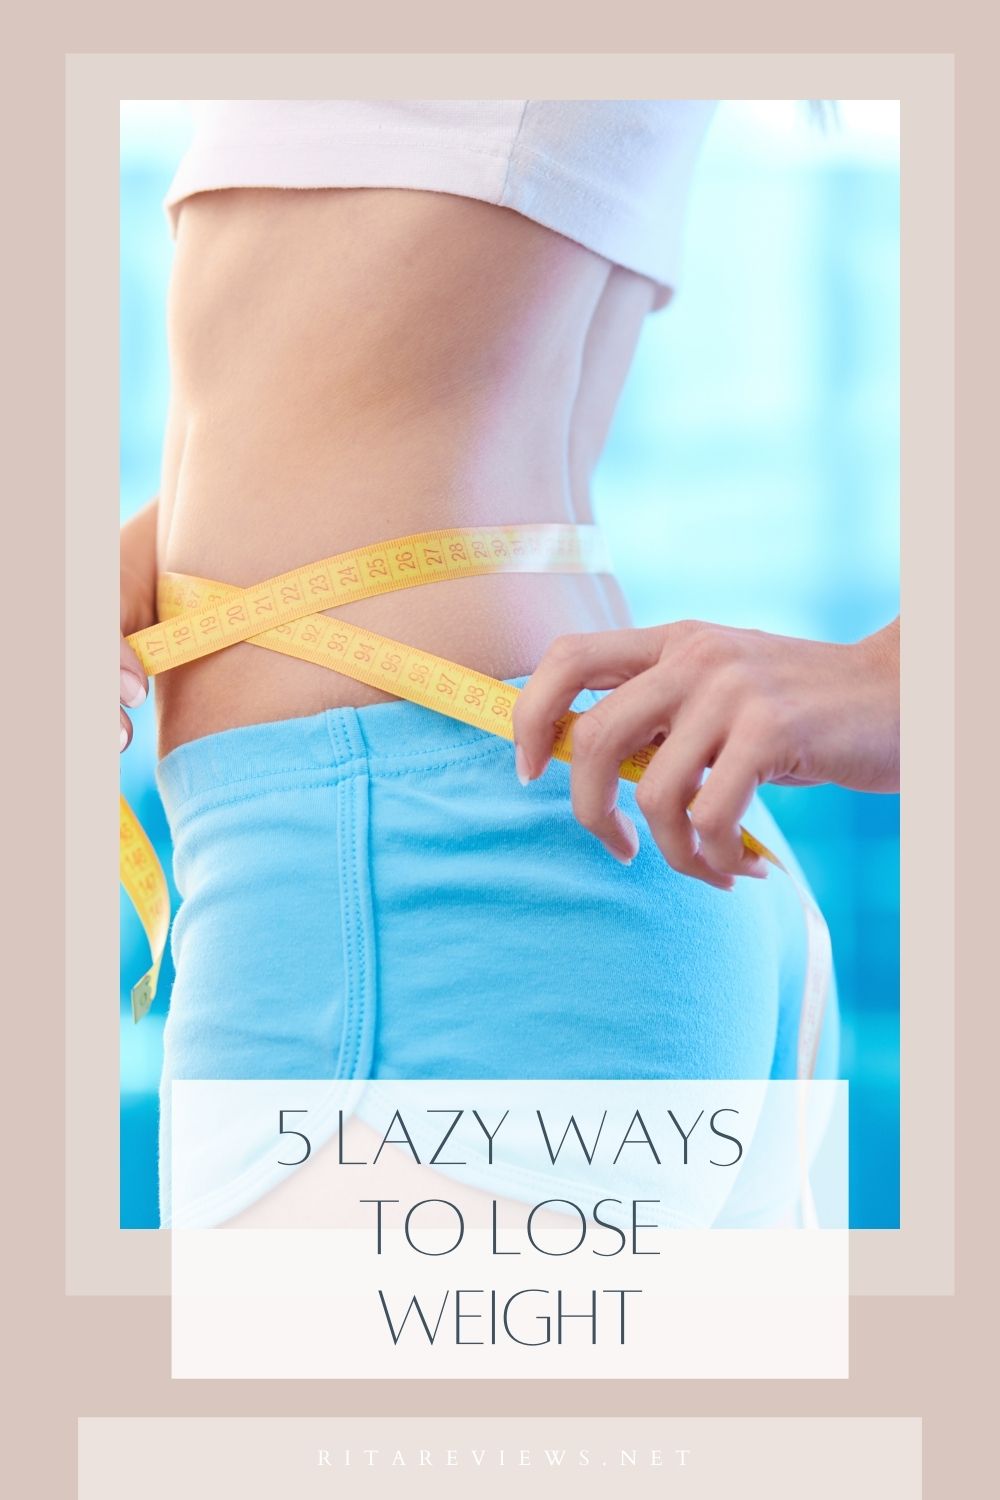 5 Lazy Ways To Lose Weight